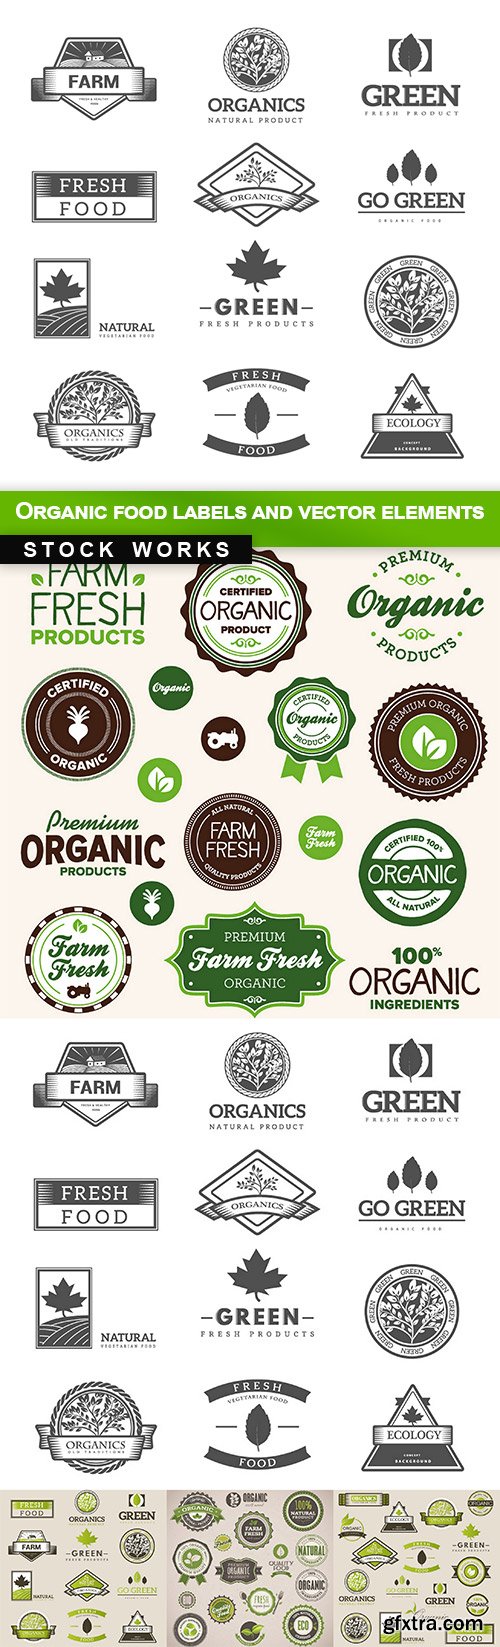 Organic food logos, labels and vector elements - 5 EPS